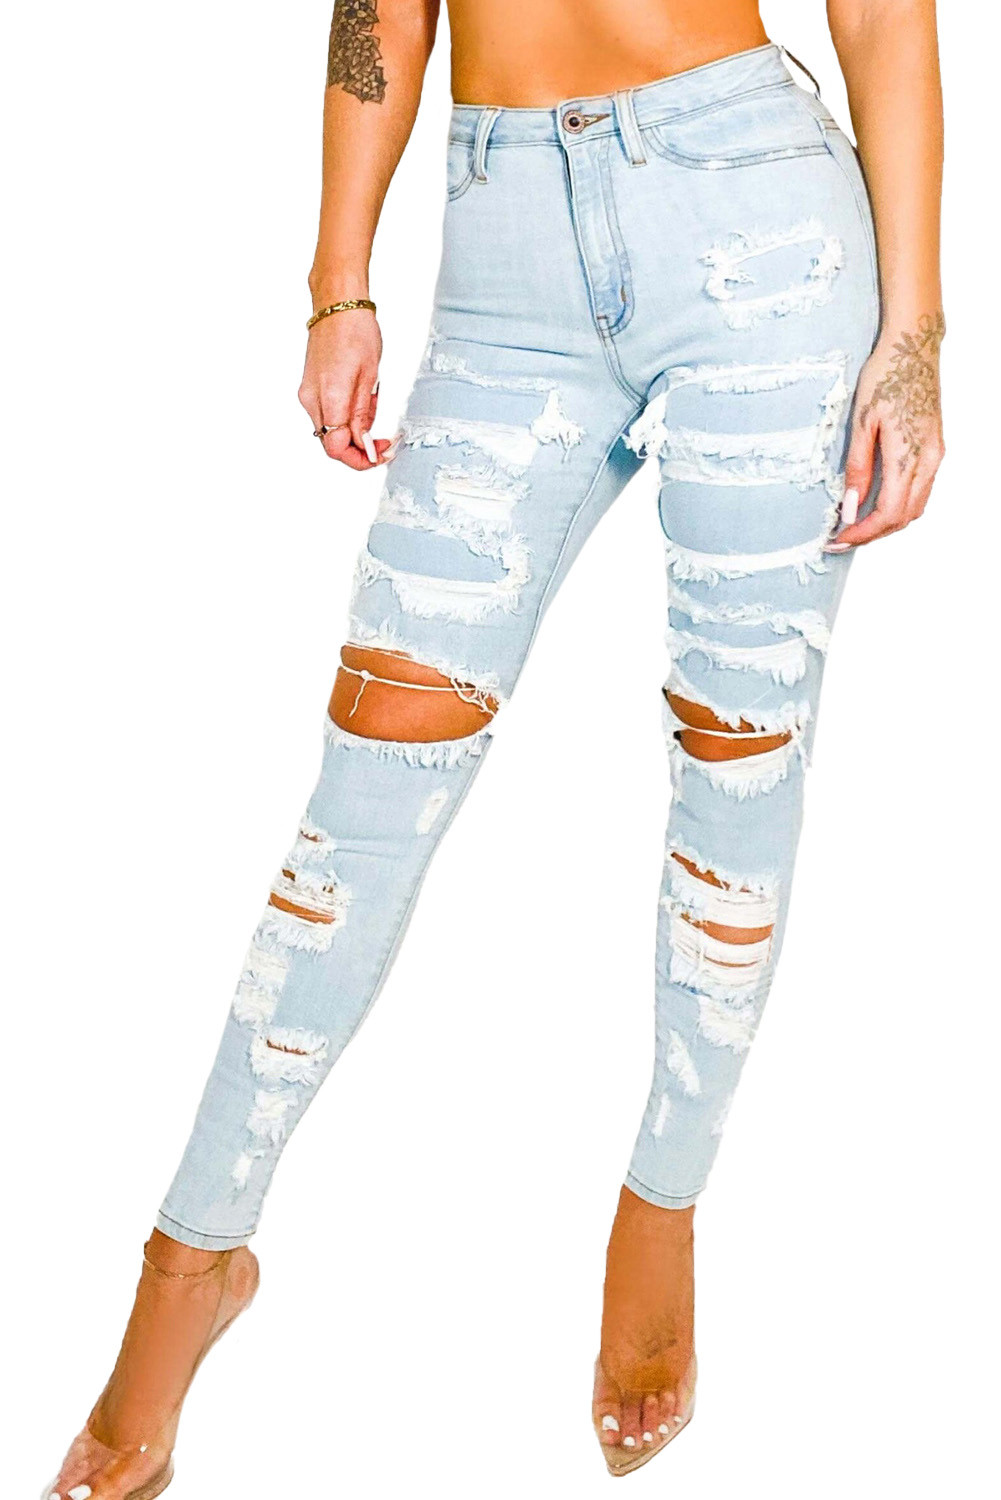 US$9.9 Light Blue Distressed High Waisted Skinny Jeans Wholesale - www ...